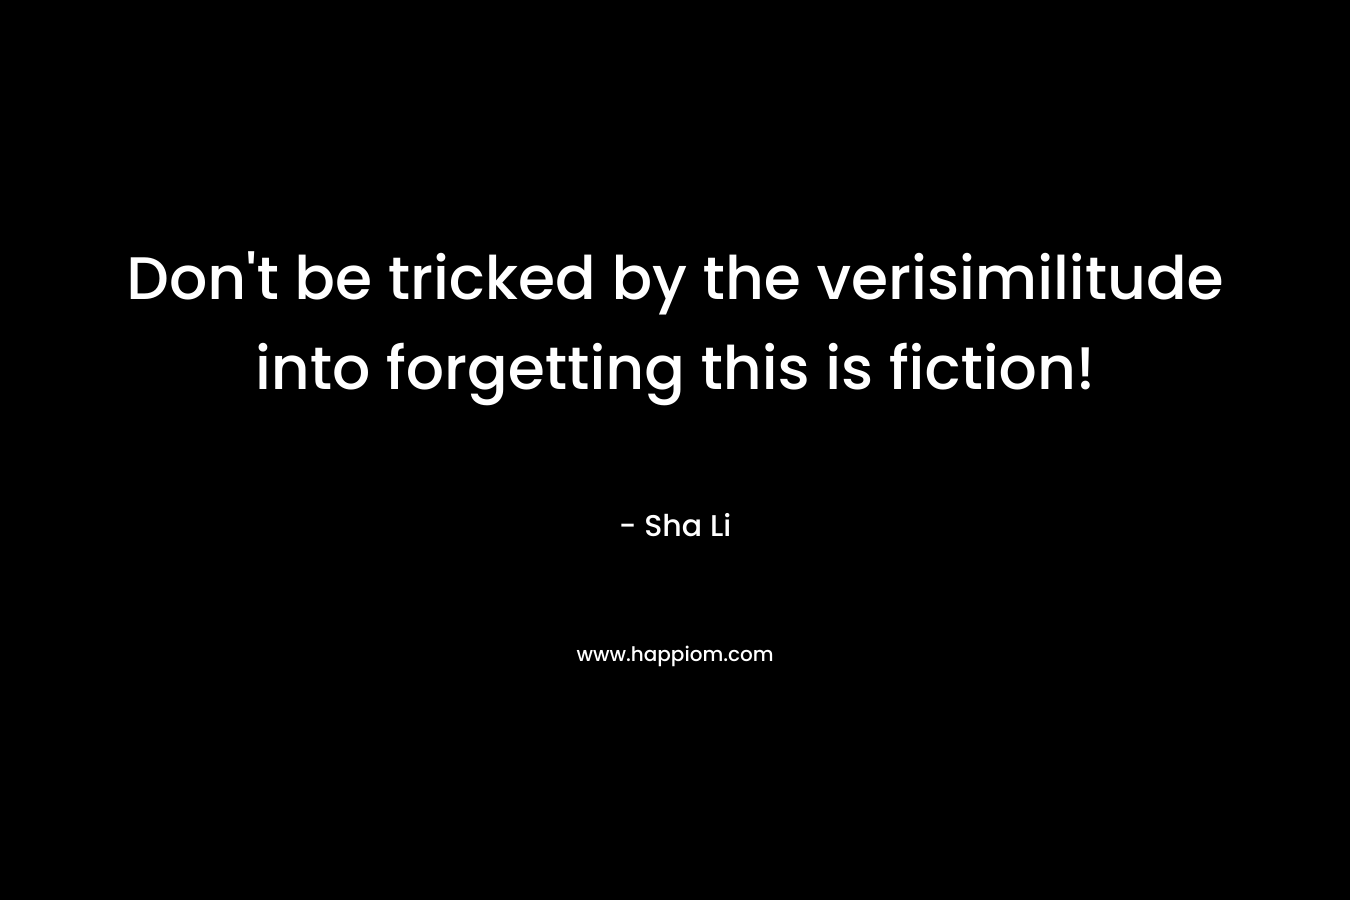 Don't be tricked by the verisimilitude into forgetting this is fiction!